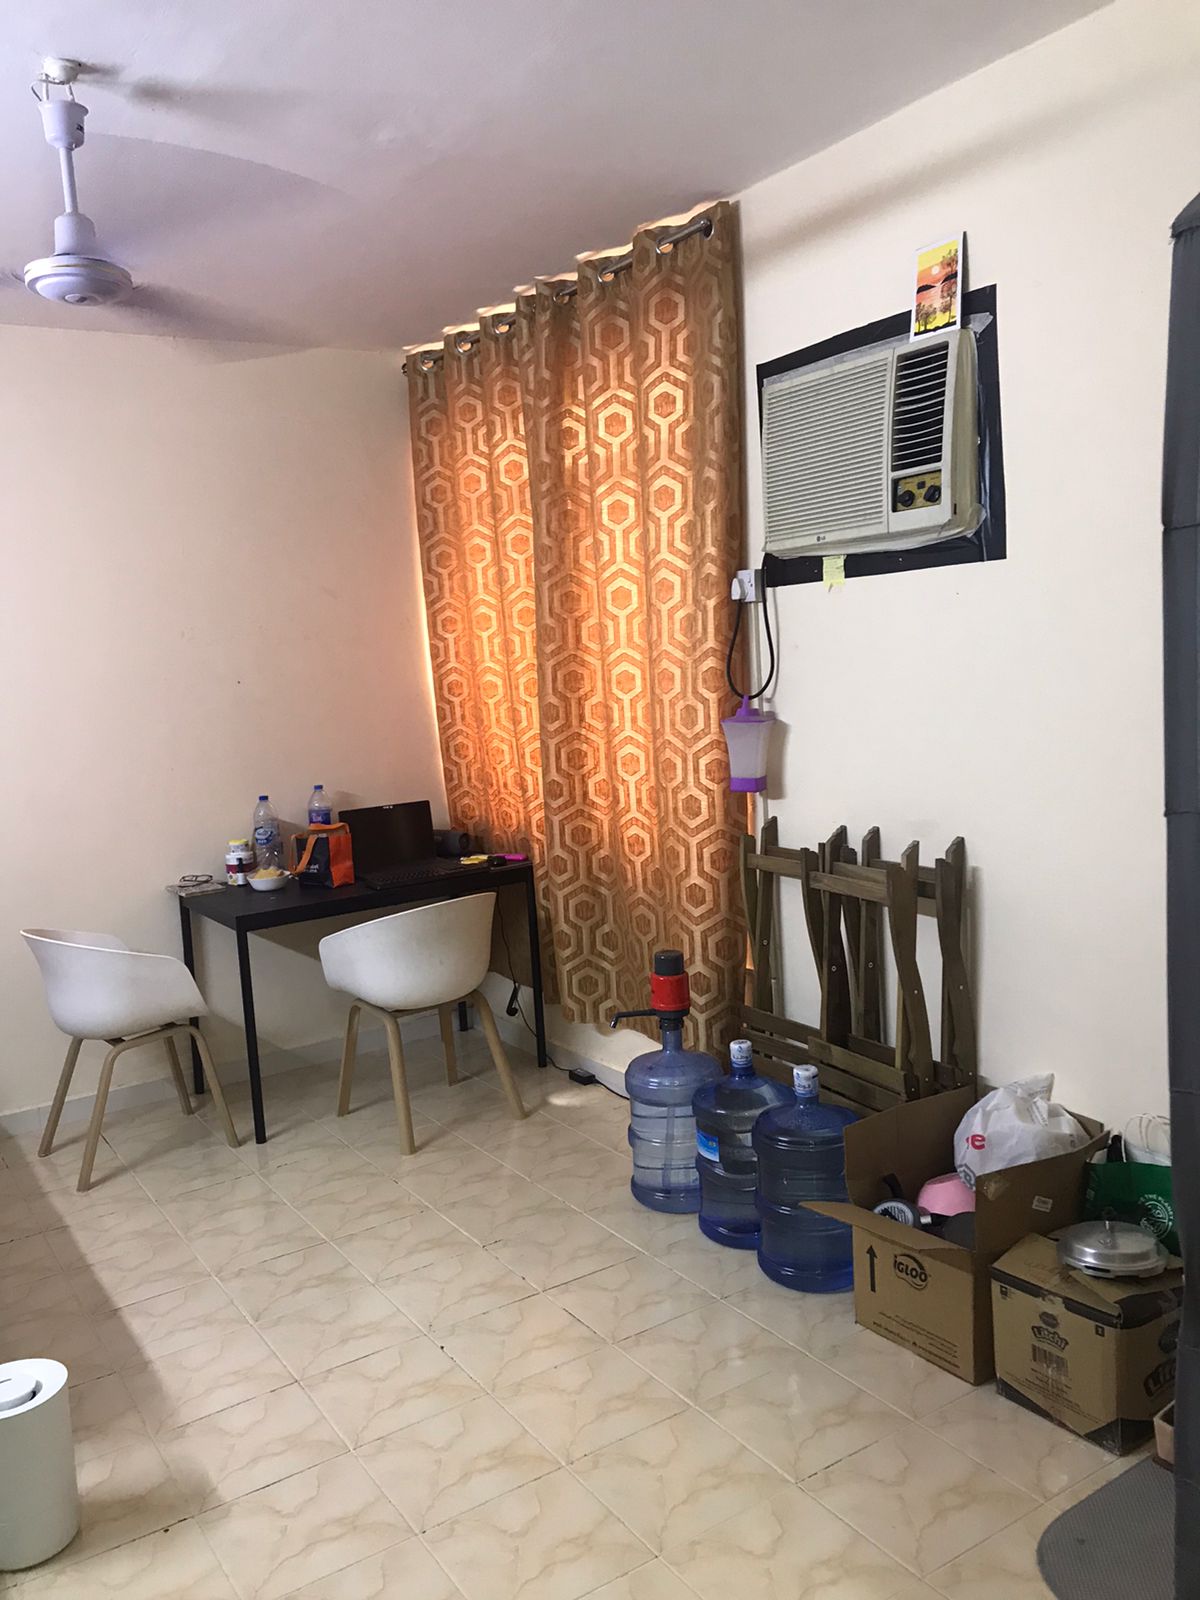 Karama Immediate Available Attached Bath Fully Furnished Family Room For Couple Or Family